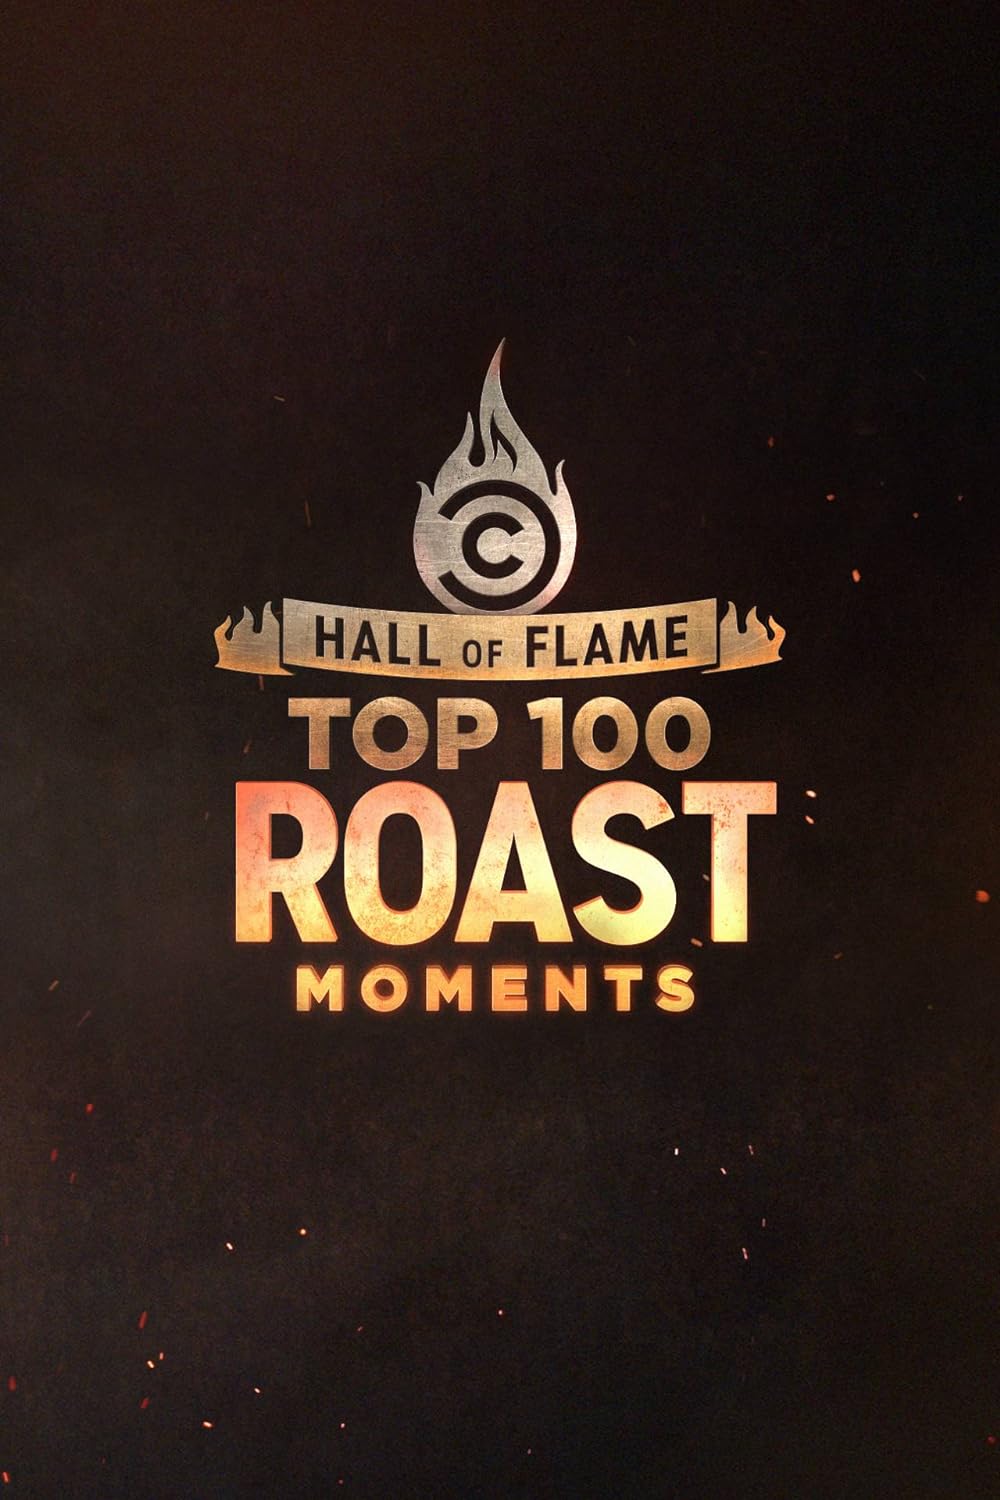 Hall of Flame: Top 100 Comedy Central Roast Moments